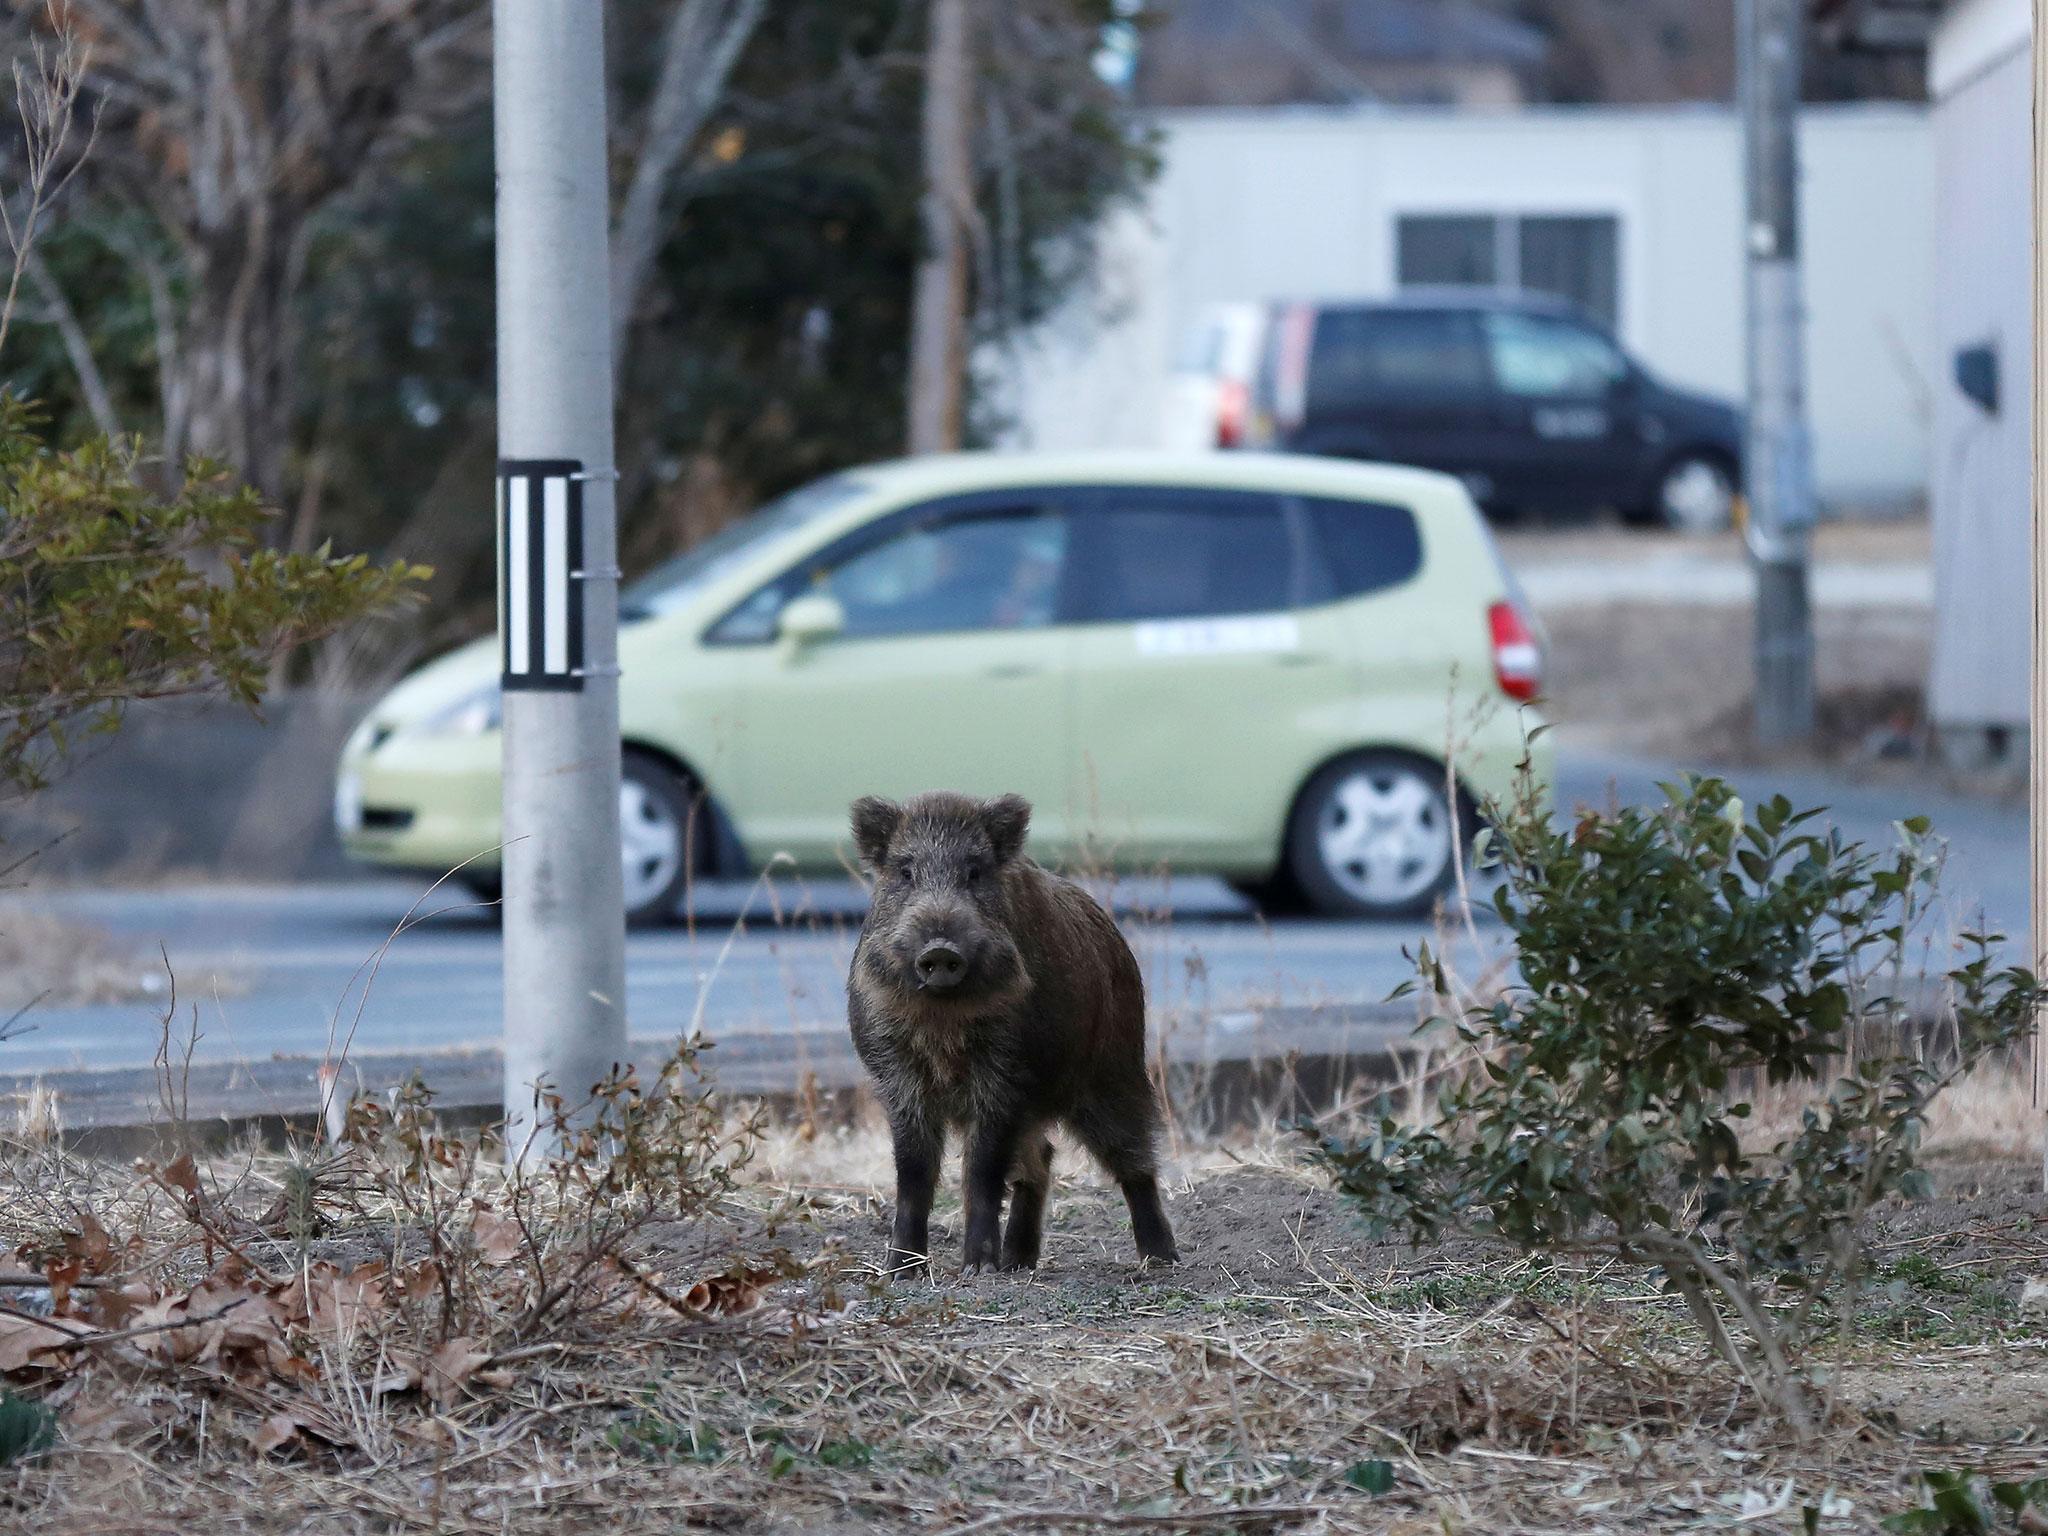 Wild boars are said to be outnumbering humans in Namie town in the Fukushima prefecture